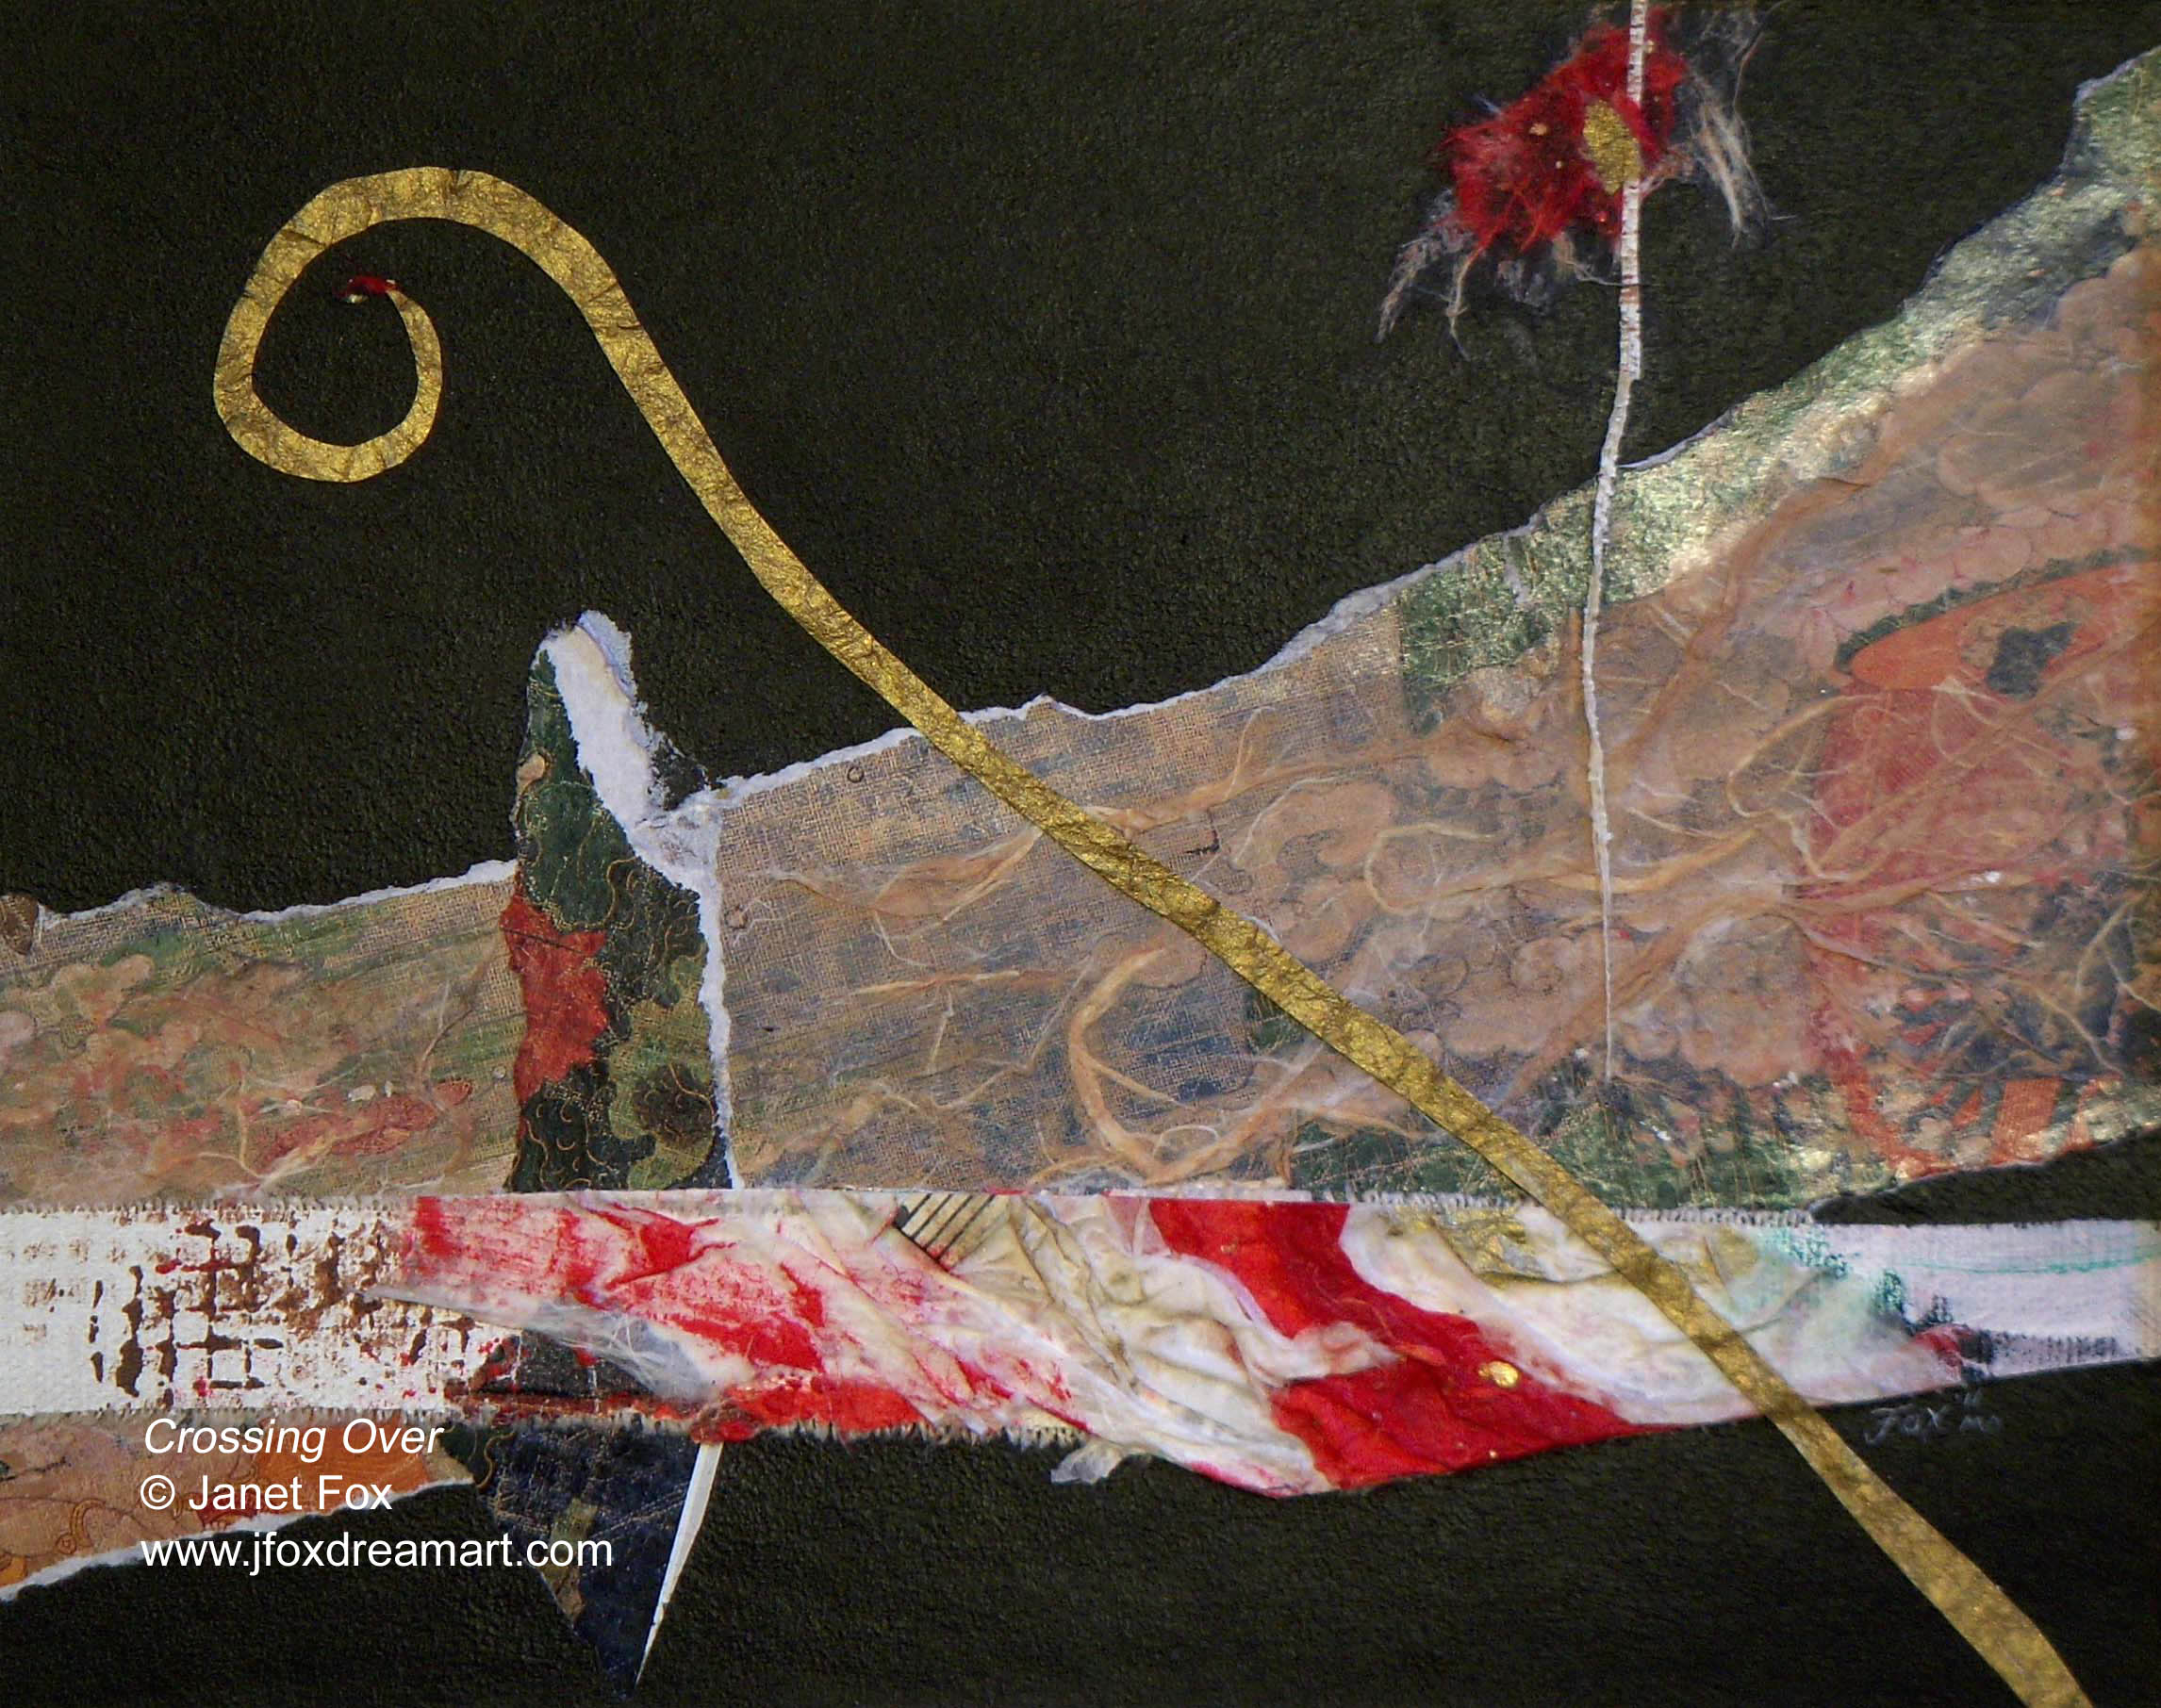 Image of a mixed media painting by Janet Fox titled "Crossing Over."